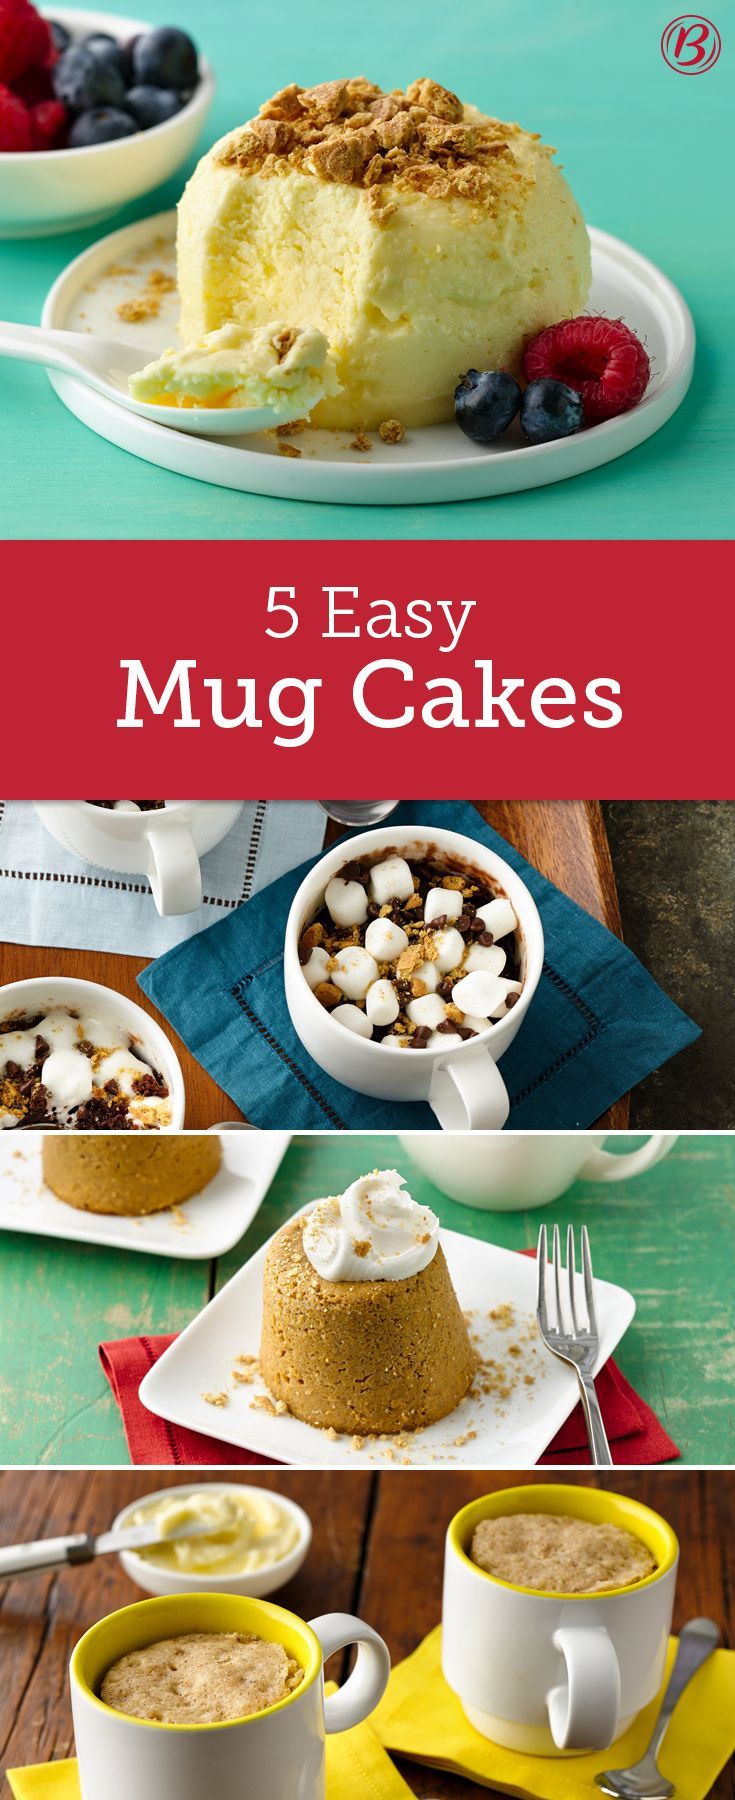 Look out coffee and hot cocoa, now you can make breakfast and dessert in your favorite mug, in minutes! From cheesecake and